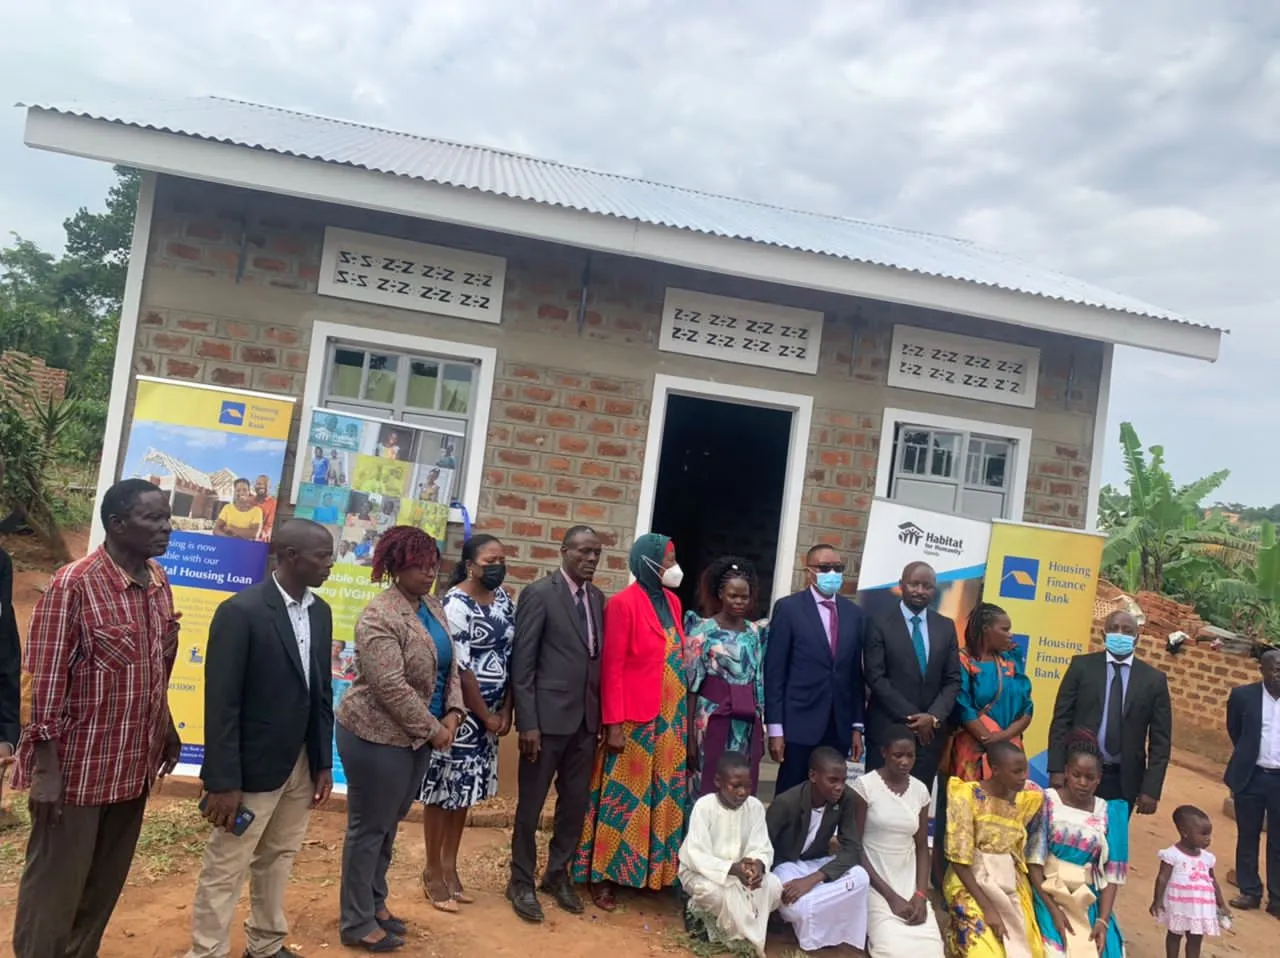 I am no longer the woman who lives in a mud and wattle collapsing house – Kalagi resident as she receives house from Habitat for Humanity